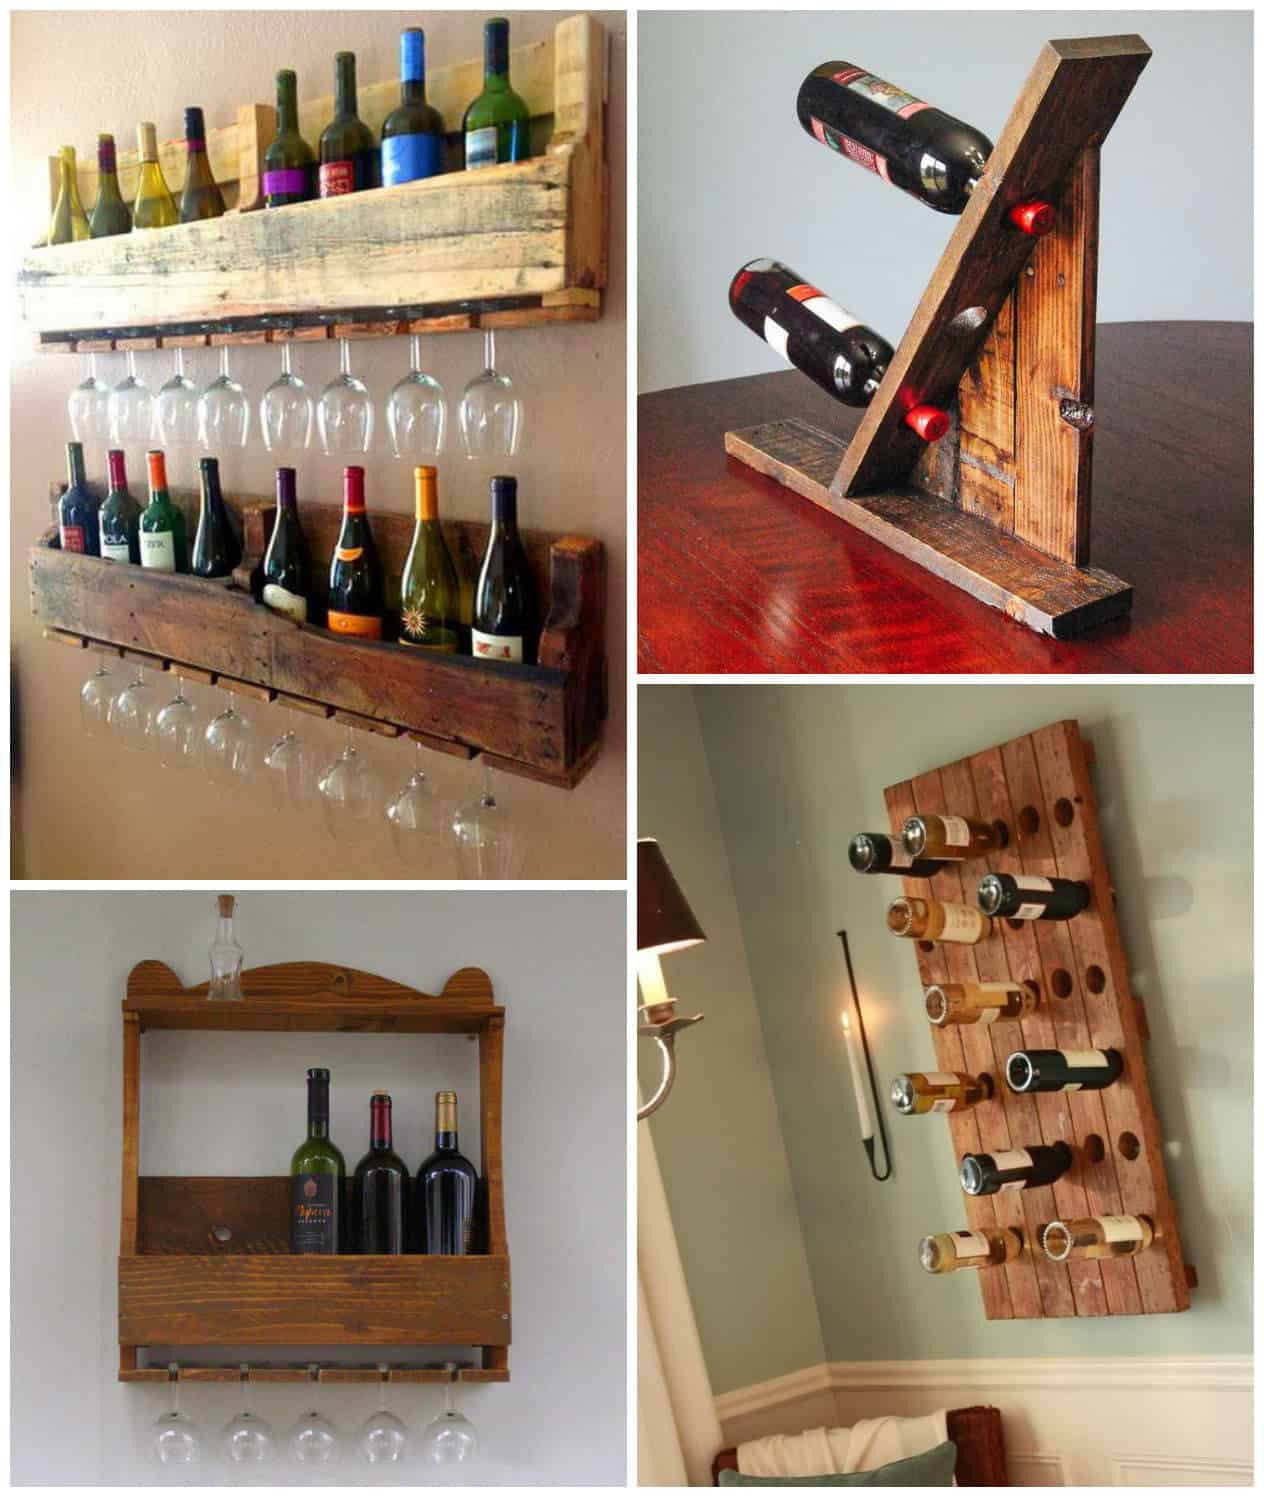 Wood Pallet Wine Rack DIY
 Wine Racks Made From Recycled Pallet Wood • Recyclart